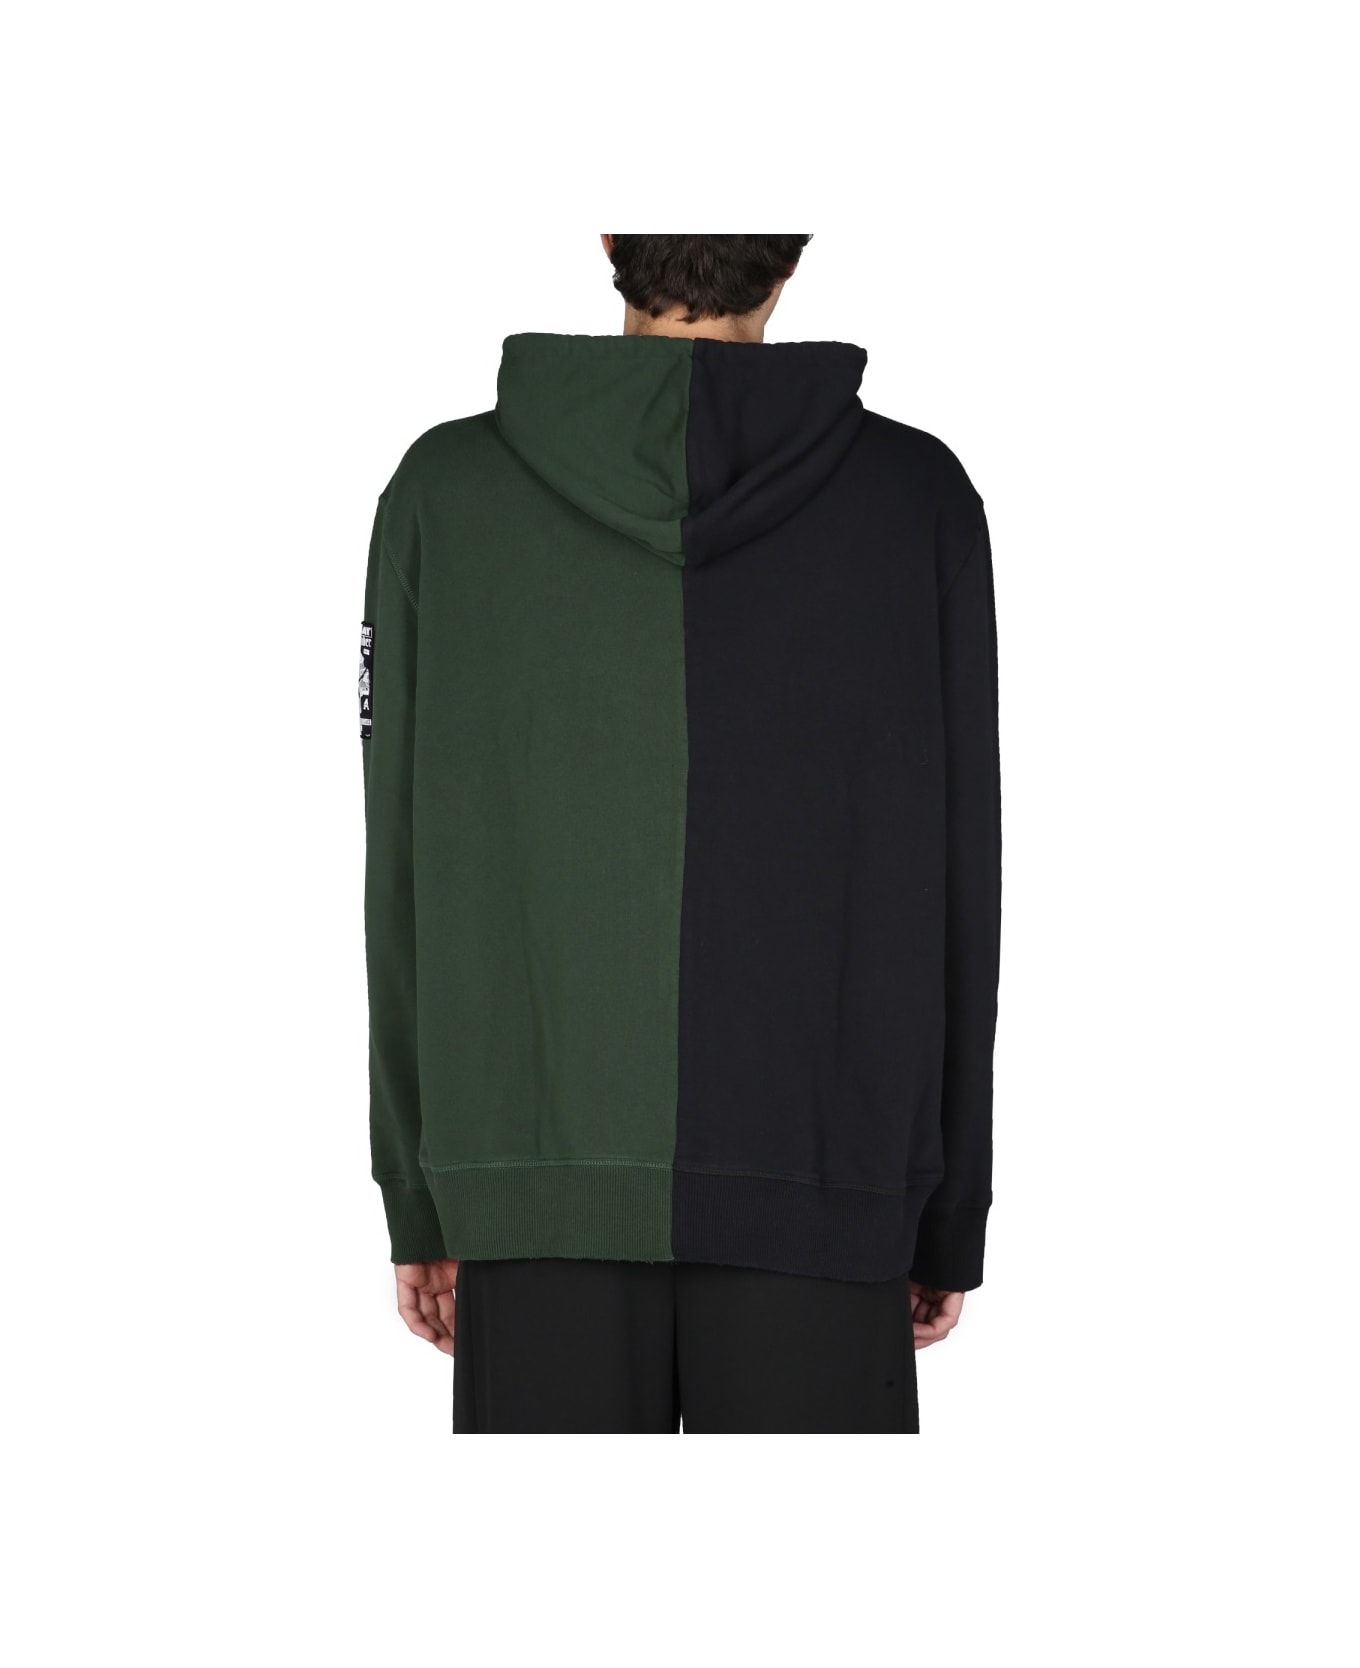 Fred Perry by Raf Simons Zip Sweatshirt. - MULTICOLOUR